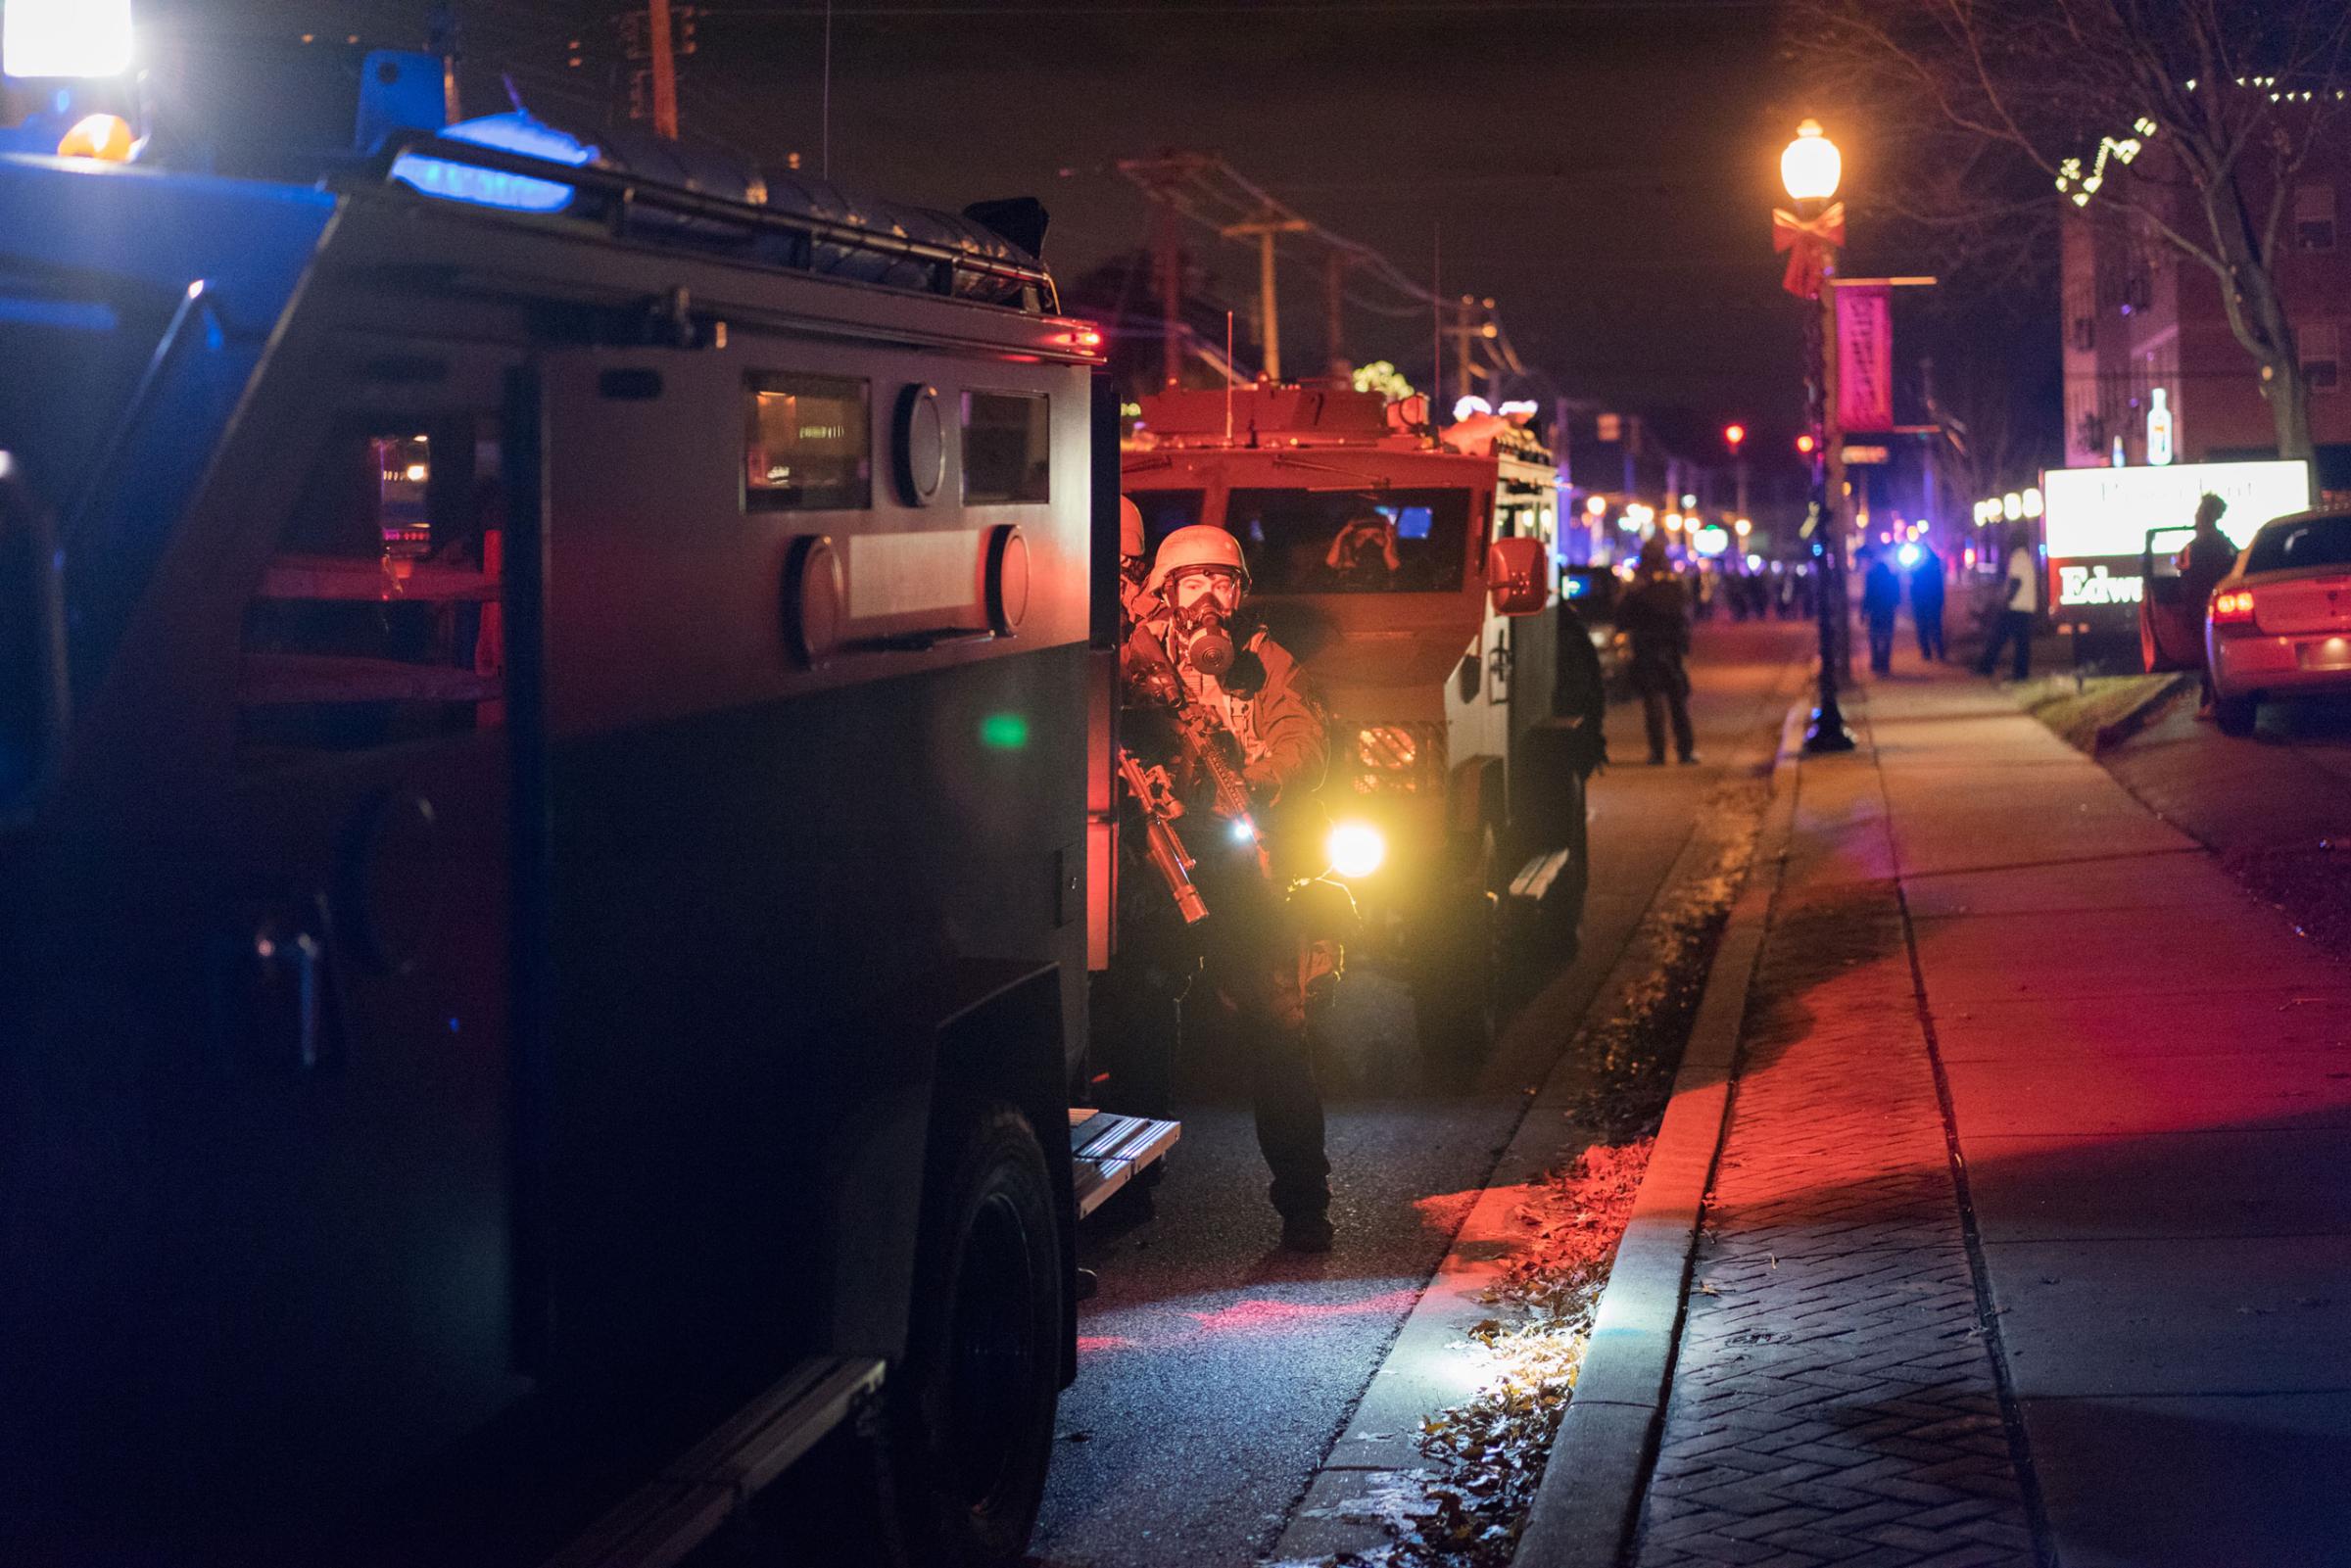 Law enforcement responds to protestors amidst tear gas and smoke in Ferguson, Mo. on Nov. 24, 2014